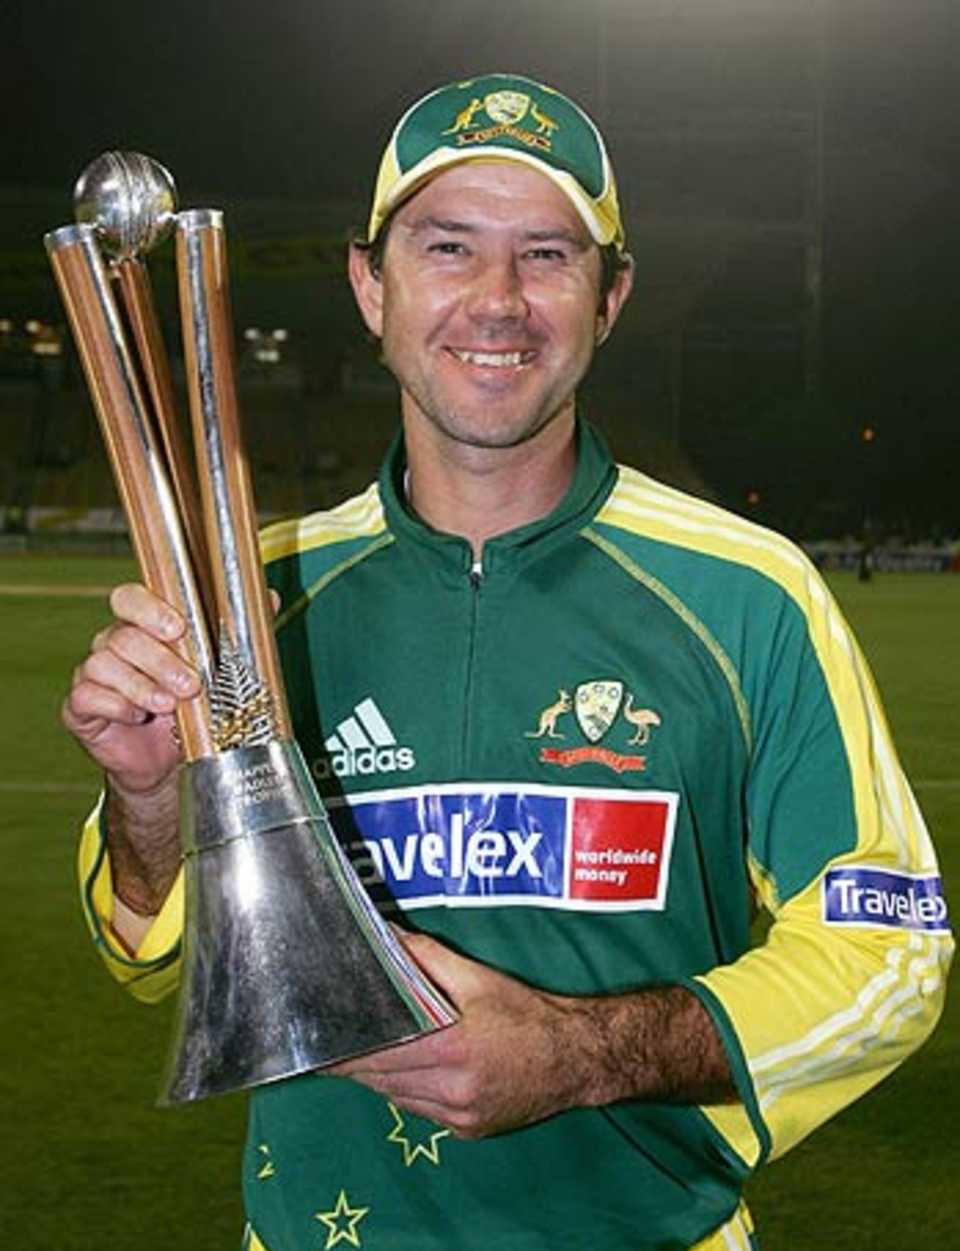 Ricky Ponting holds the Chappell-Hadlee trophy